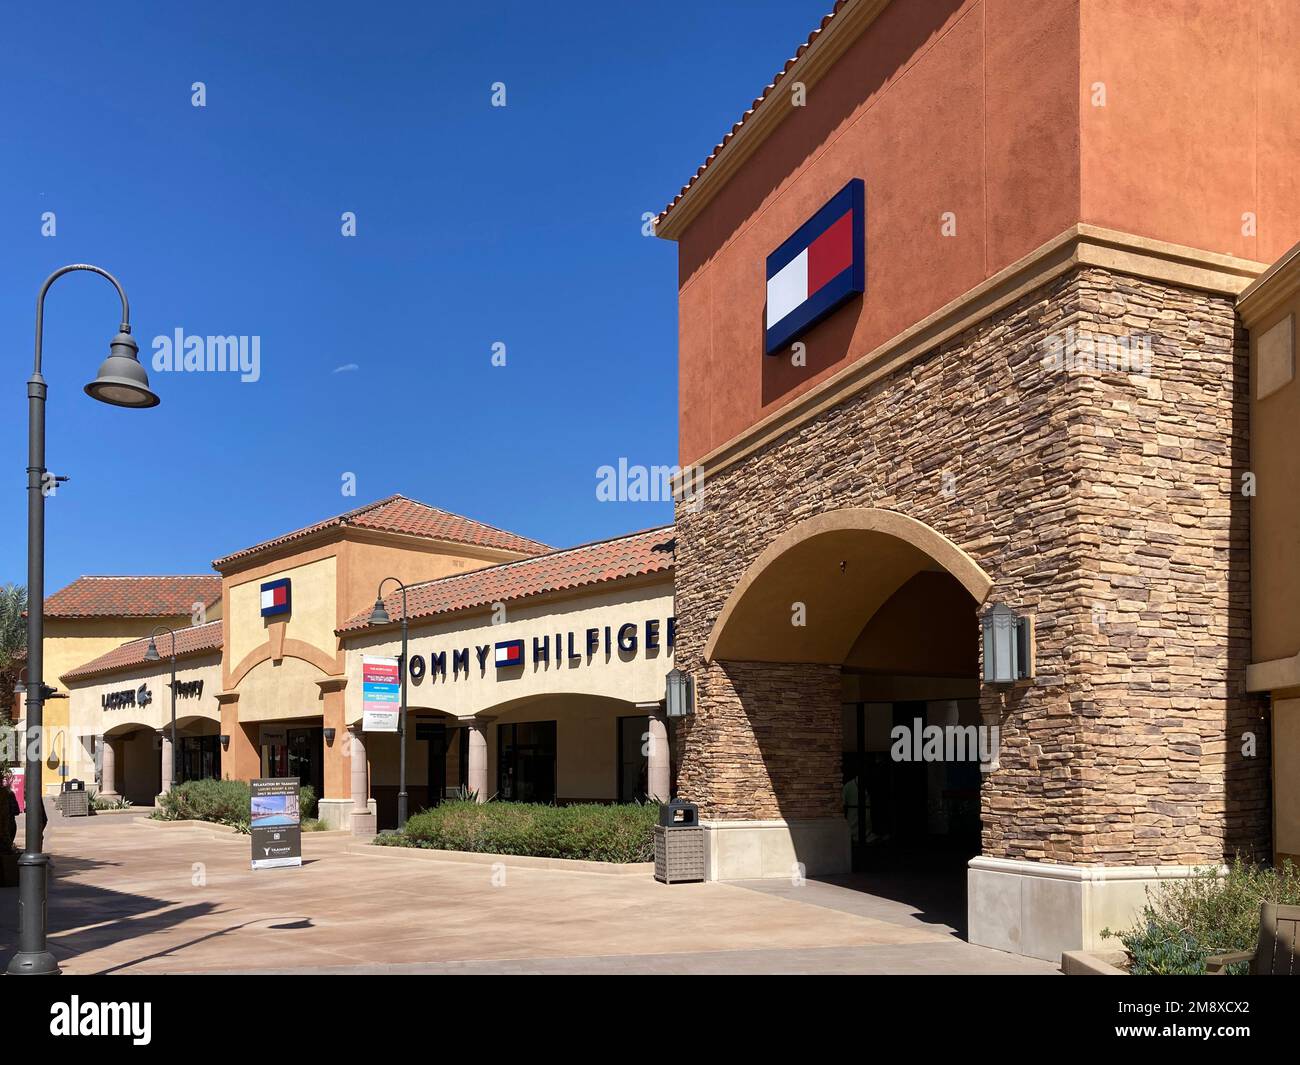 About Desert Hills Premium Outlets® - A Shopping Center in Cabazon, CA - A  Simon Property